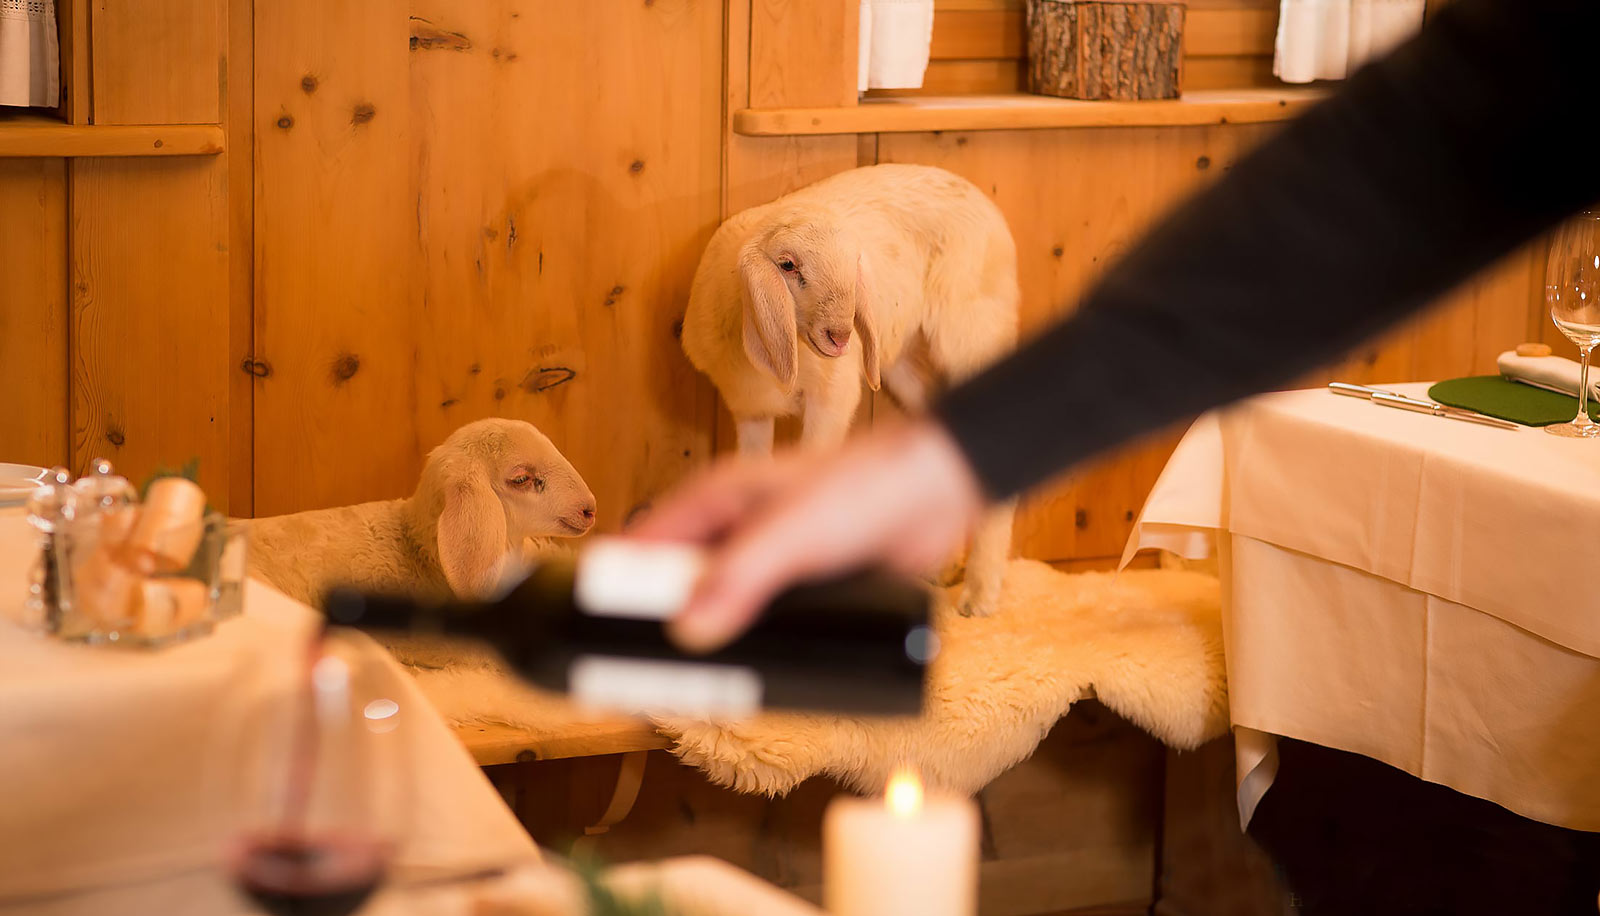 Two lambs in a stube of Arosea Life Balance Hotel in Ultental-Val d'Ultimo, while somebody is pouring wine in the foreground